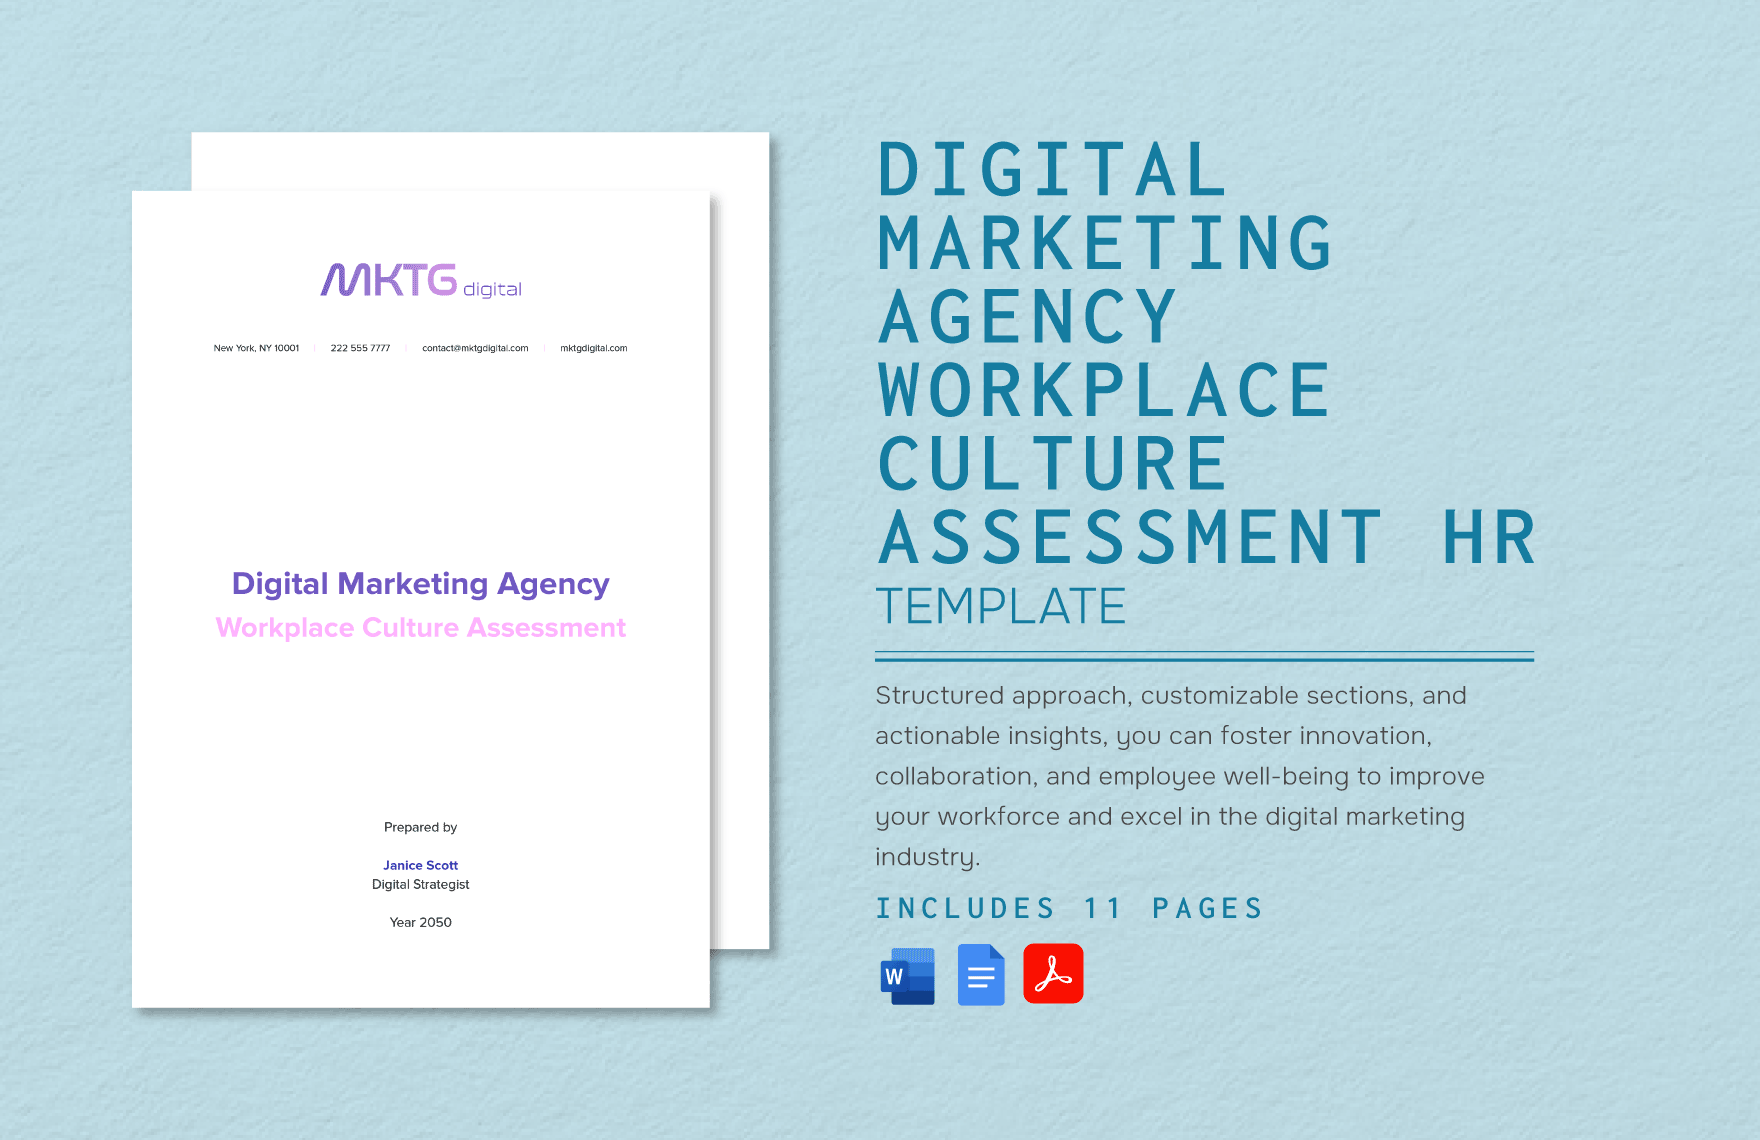 Digital Marketing Agency Workplace Culture Assessment HR Template in Word, Google Docs, PDF